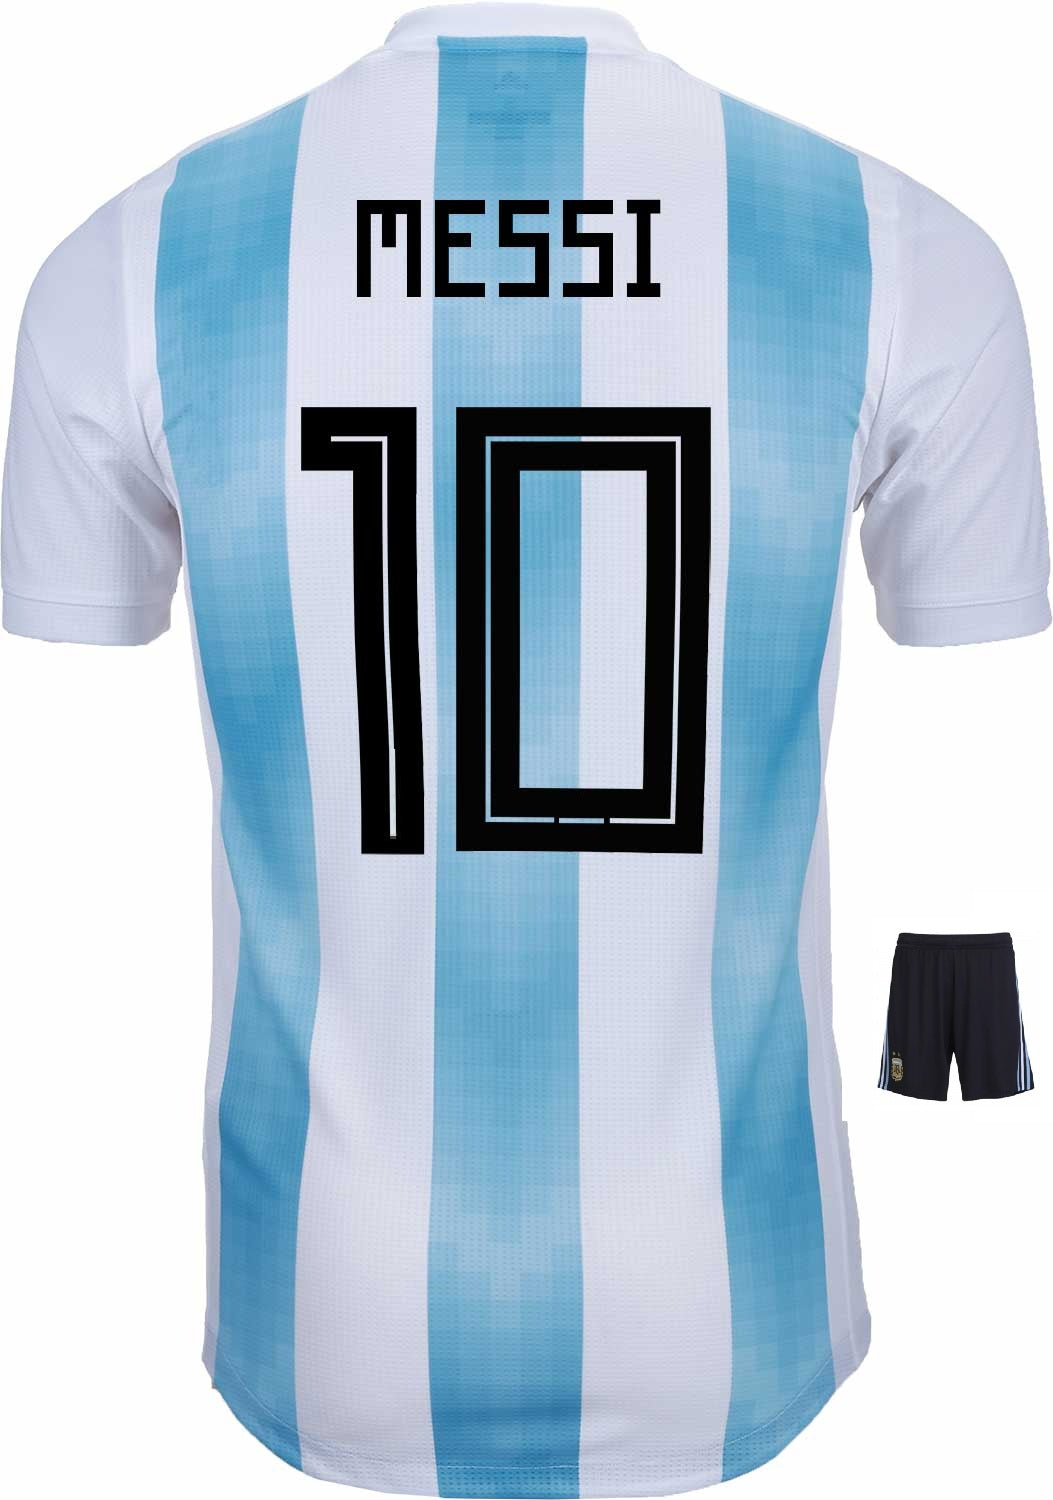 Argentina Football Jersey FIFA World Cup 2018 replica kit online India